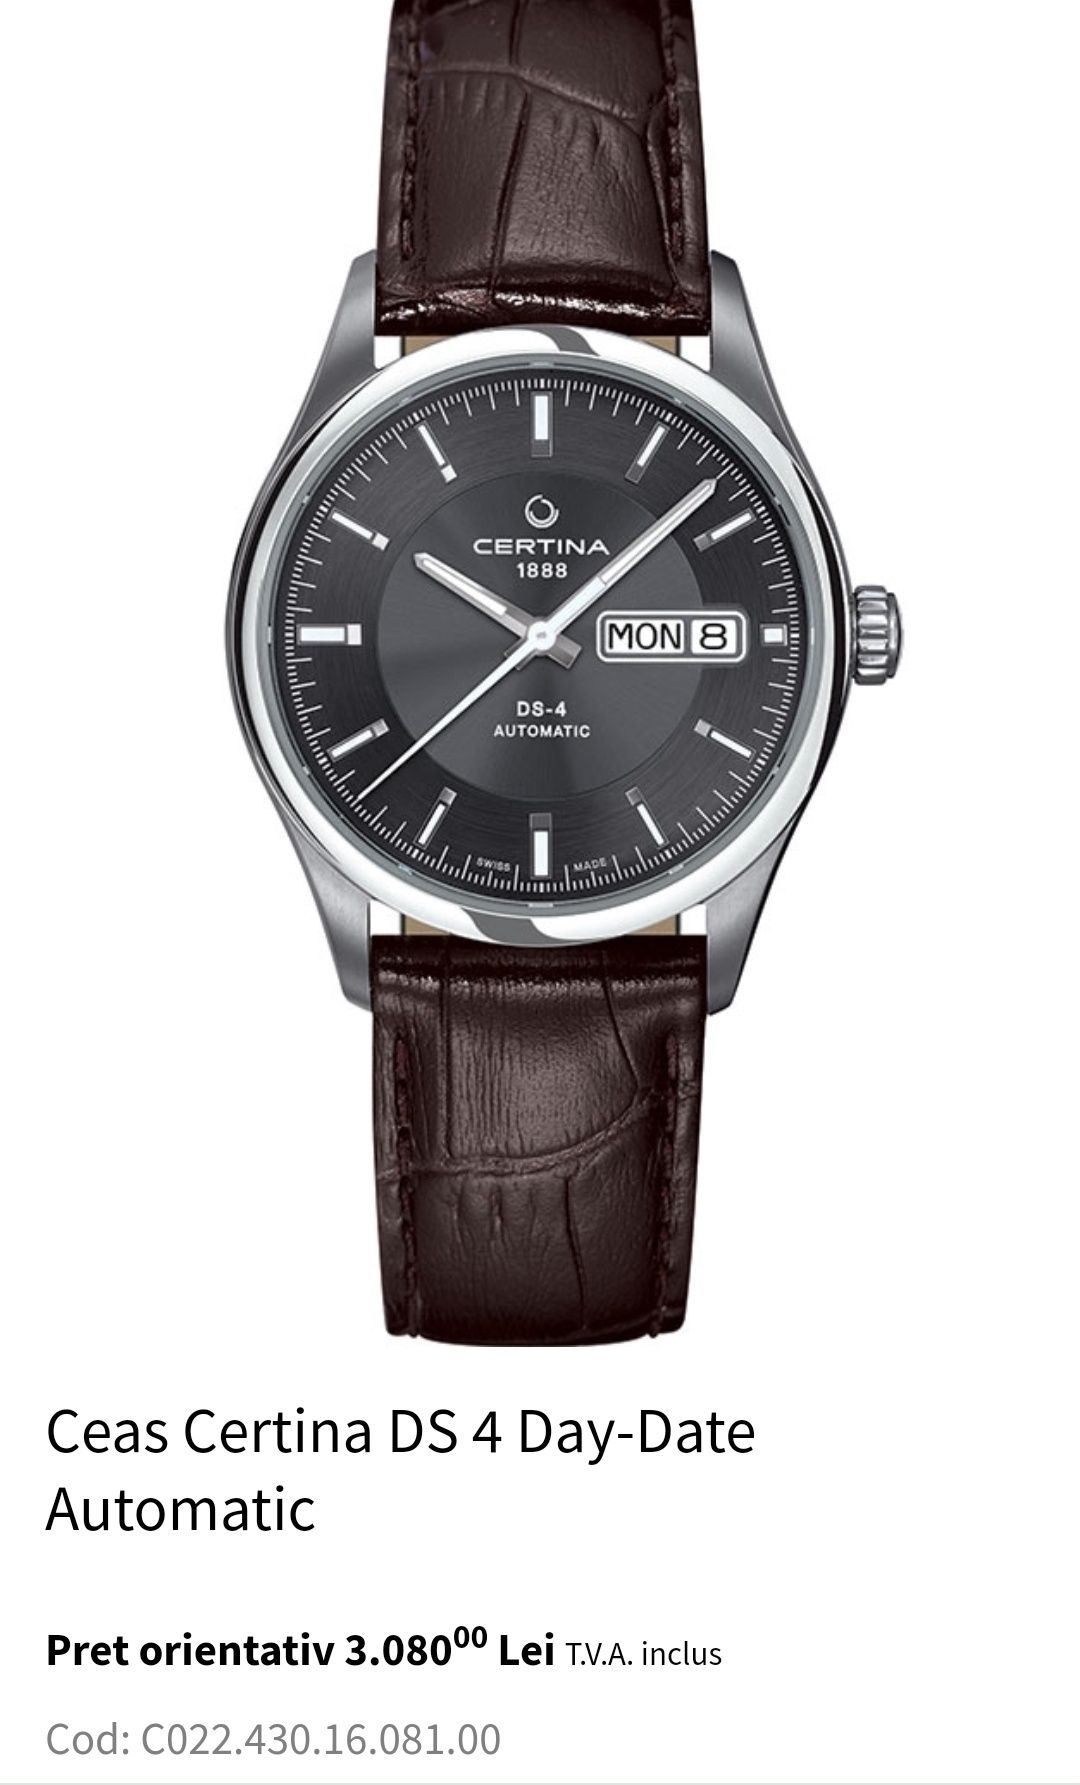 Ceas Certina DS 4 Day-Date Automatic